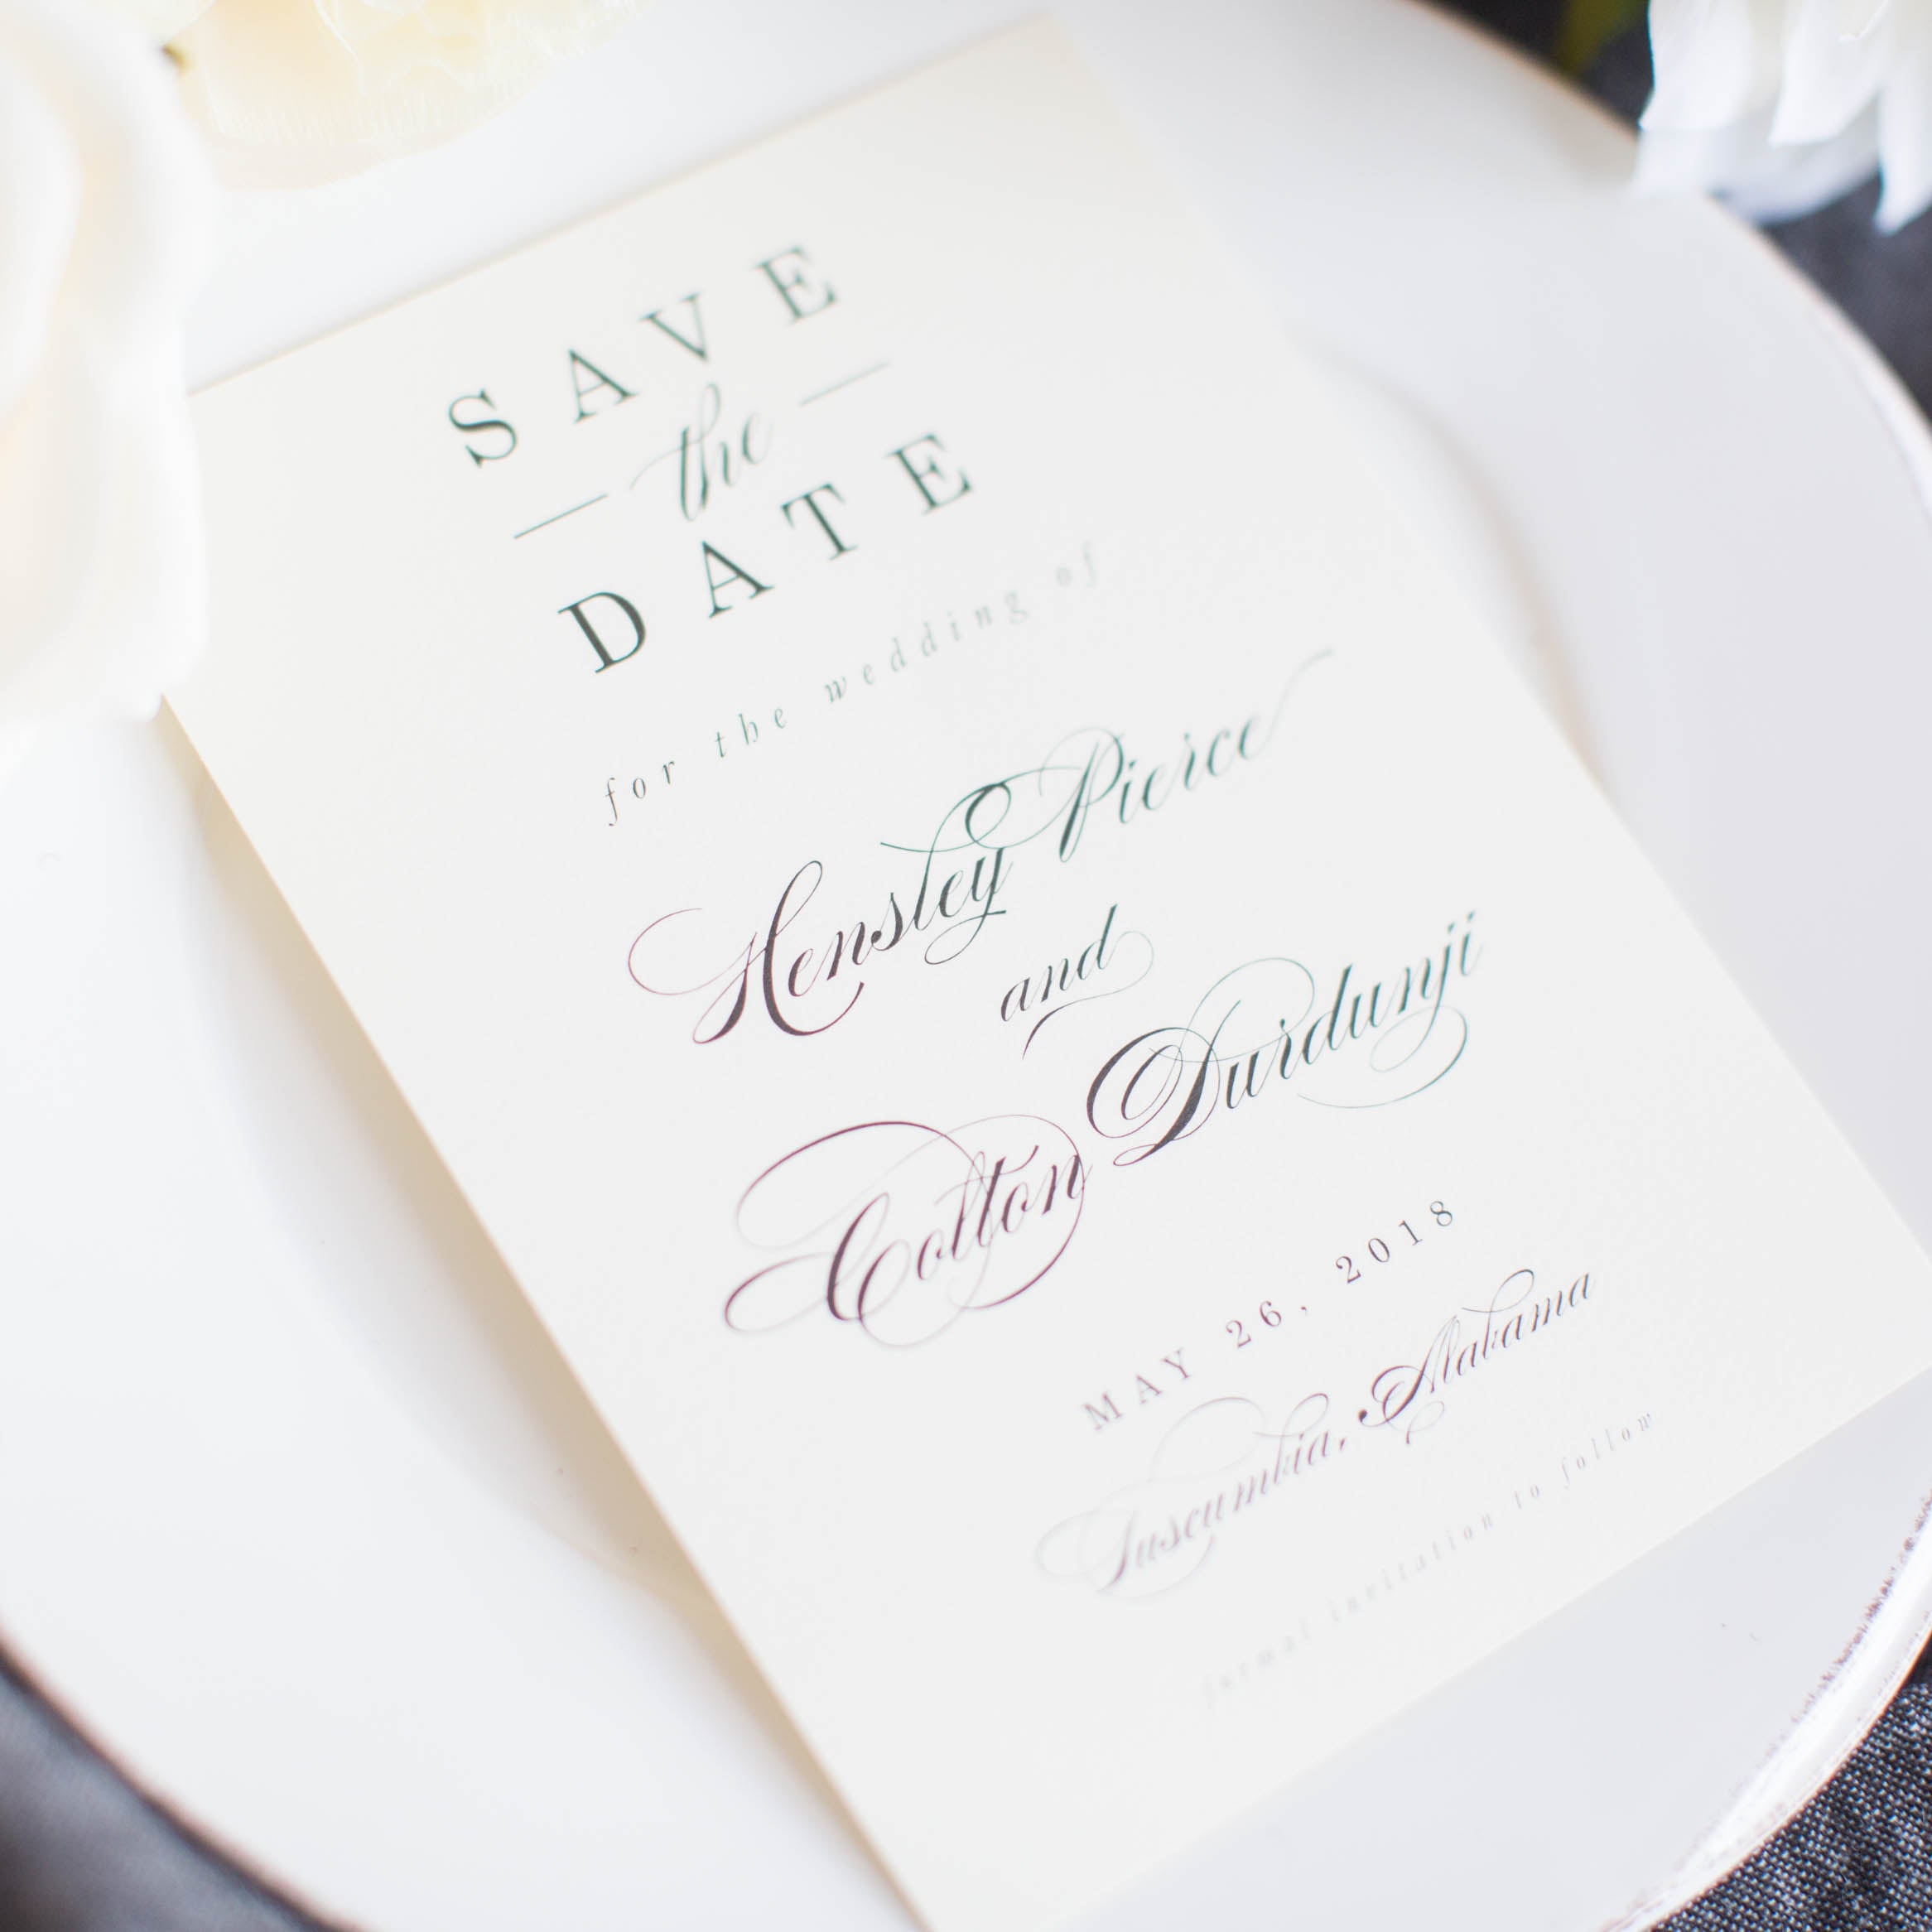 Setting the Stage for Your Wedding: The Importance of Sending Out Save the Dates for Your Wedding